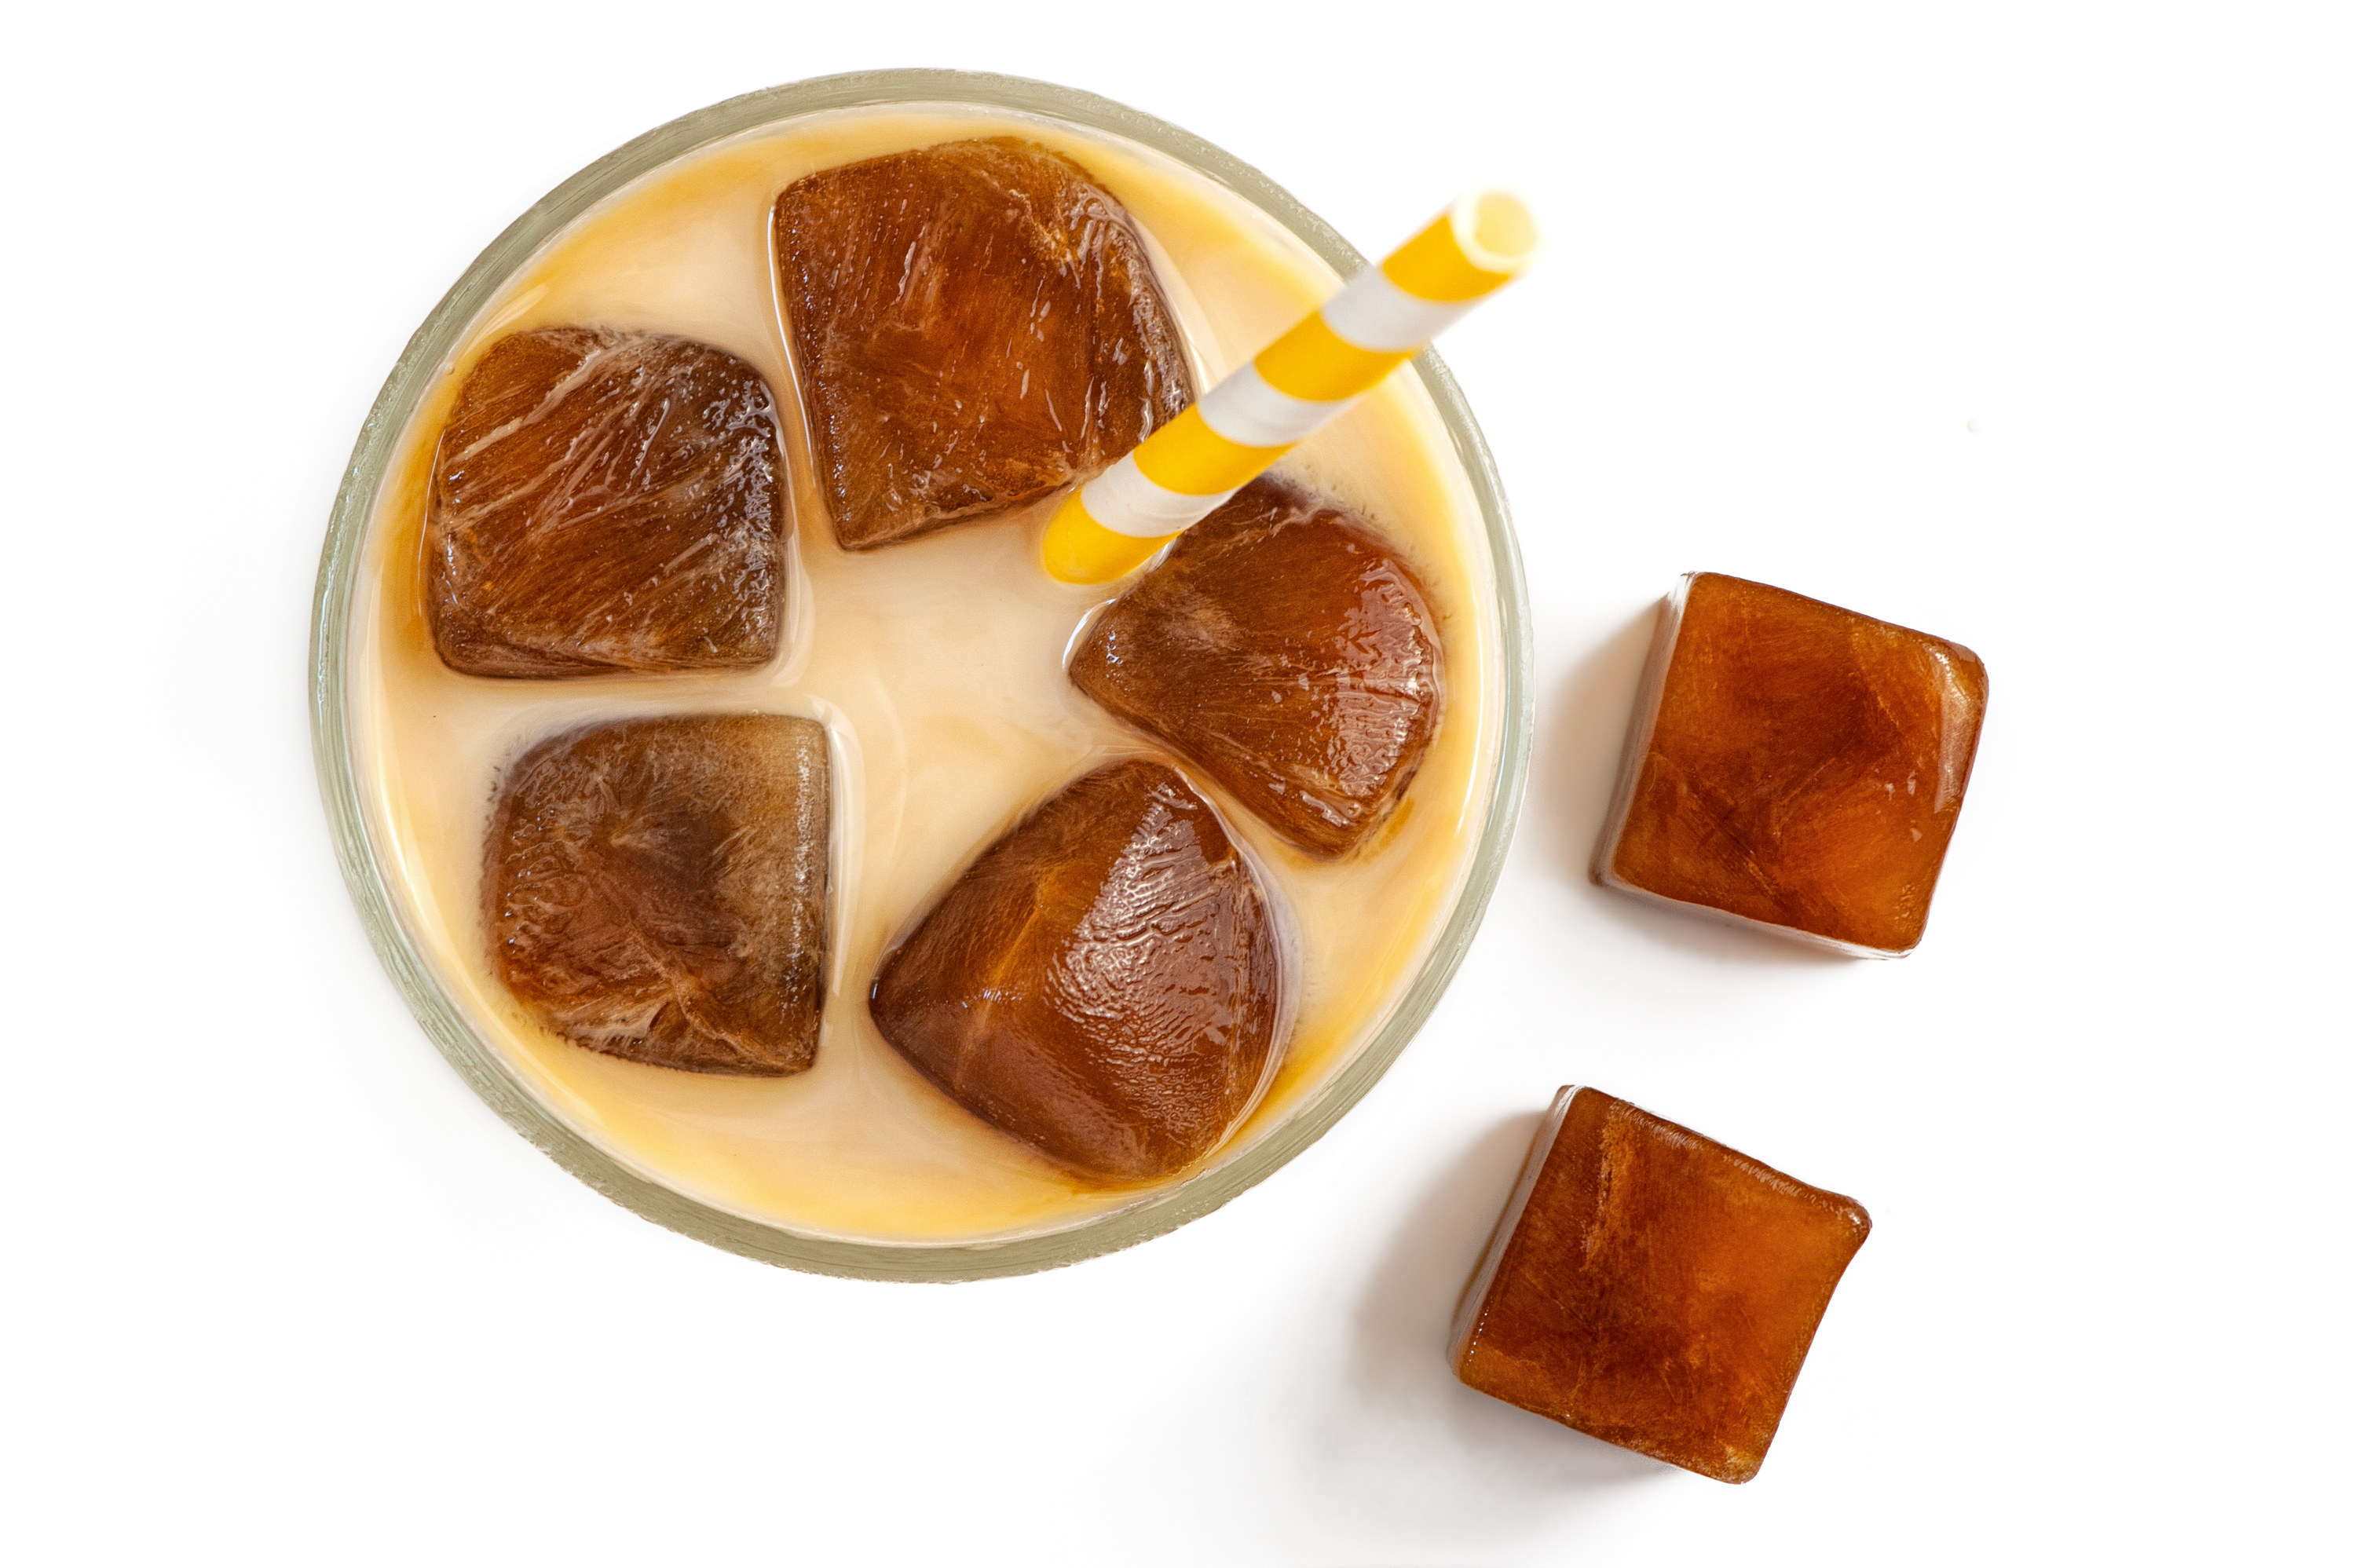 Ice cubes of coffee in a coffee glass